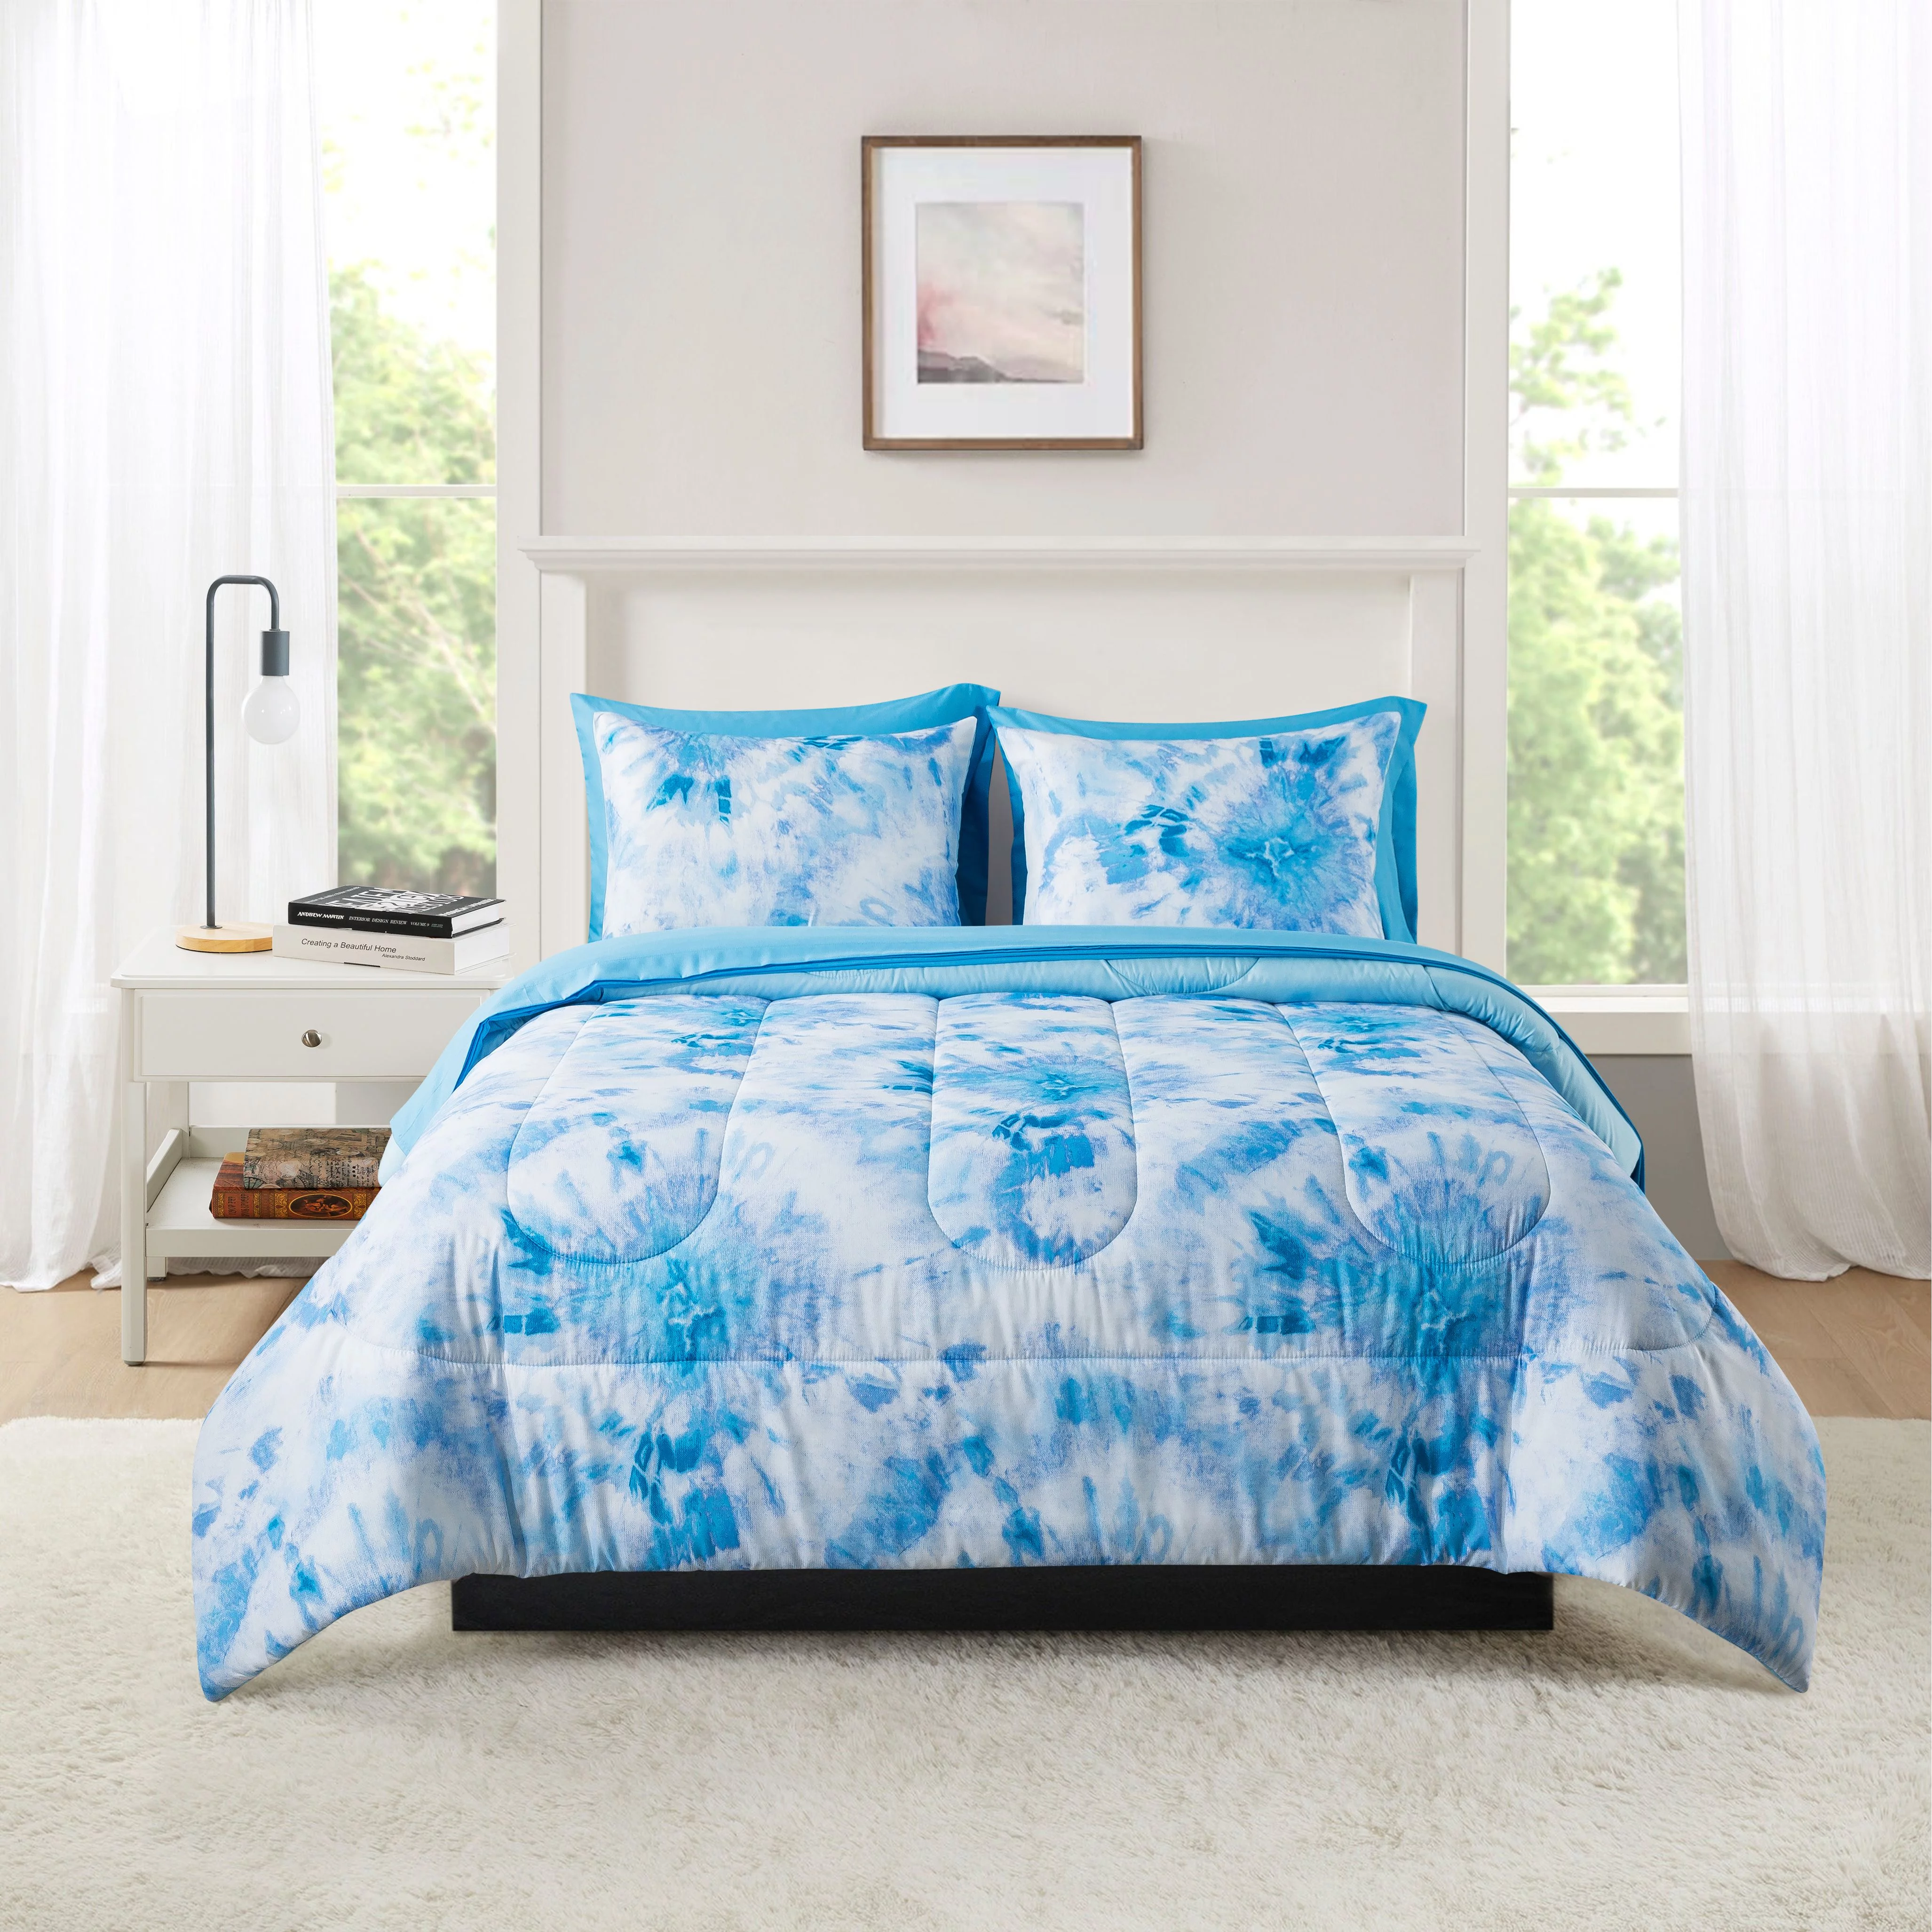 Mainstays Blue Tie Dye 5 Piece Bed in a Bag Comforter Set with Sheets, Twin/Twin XL